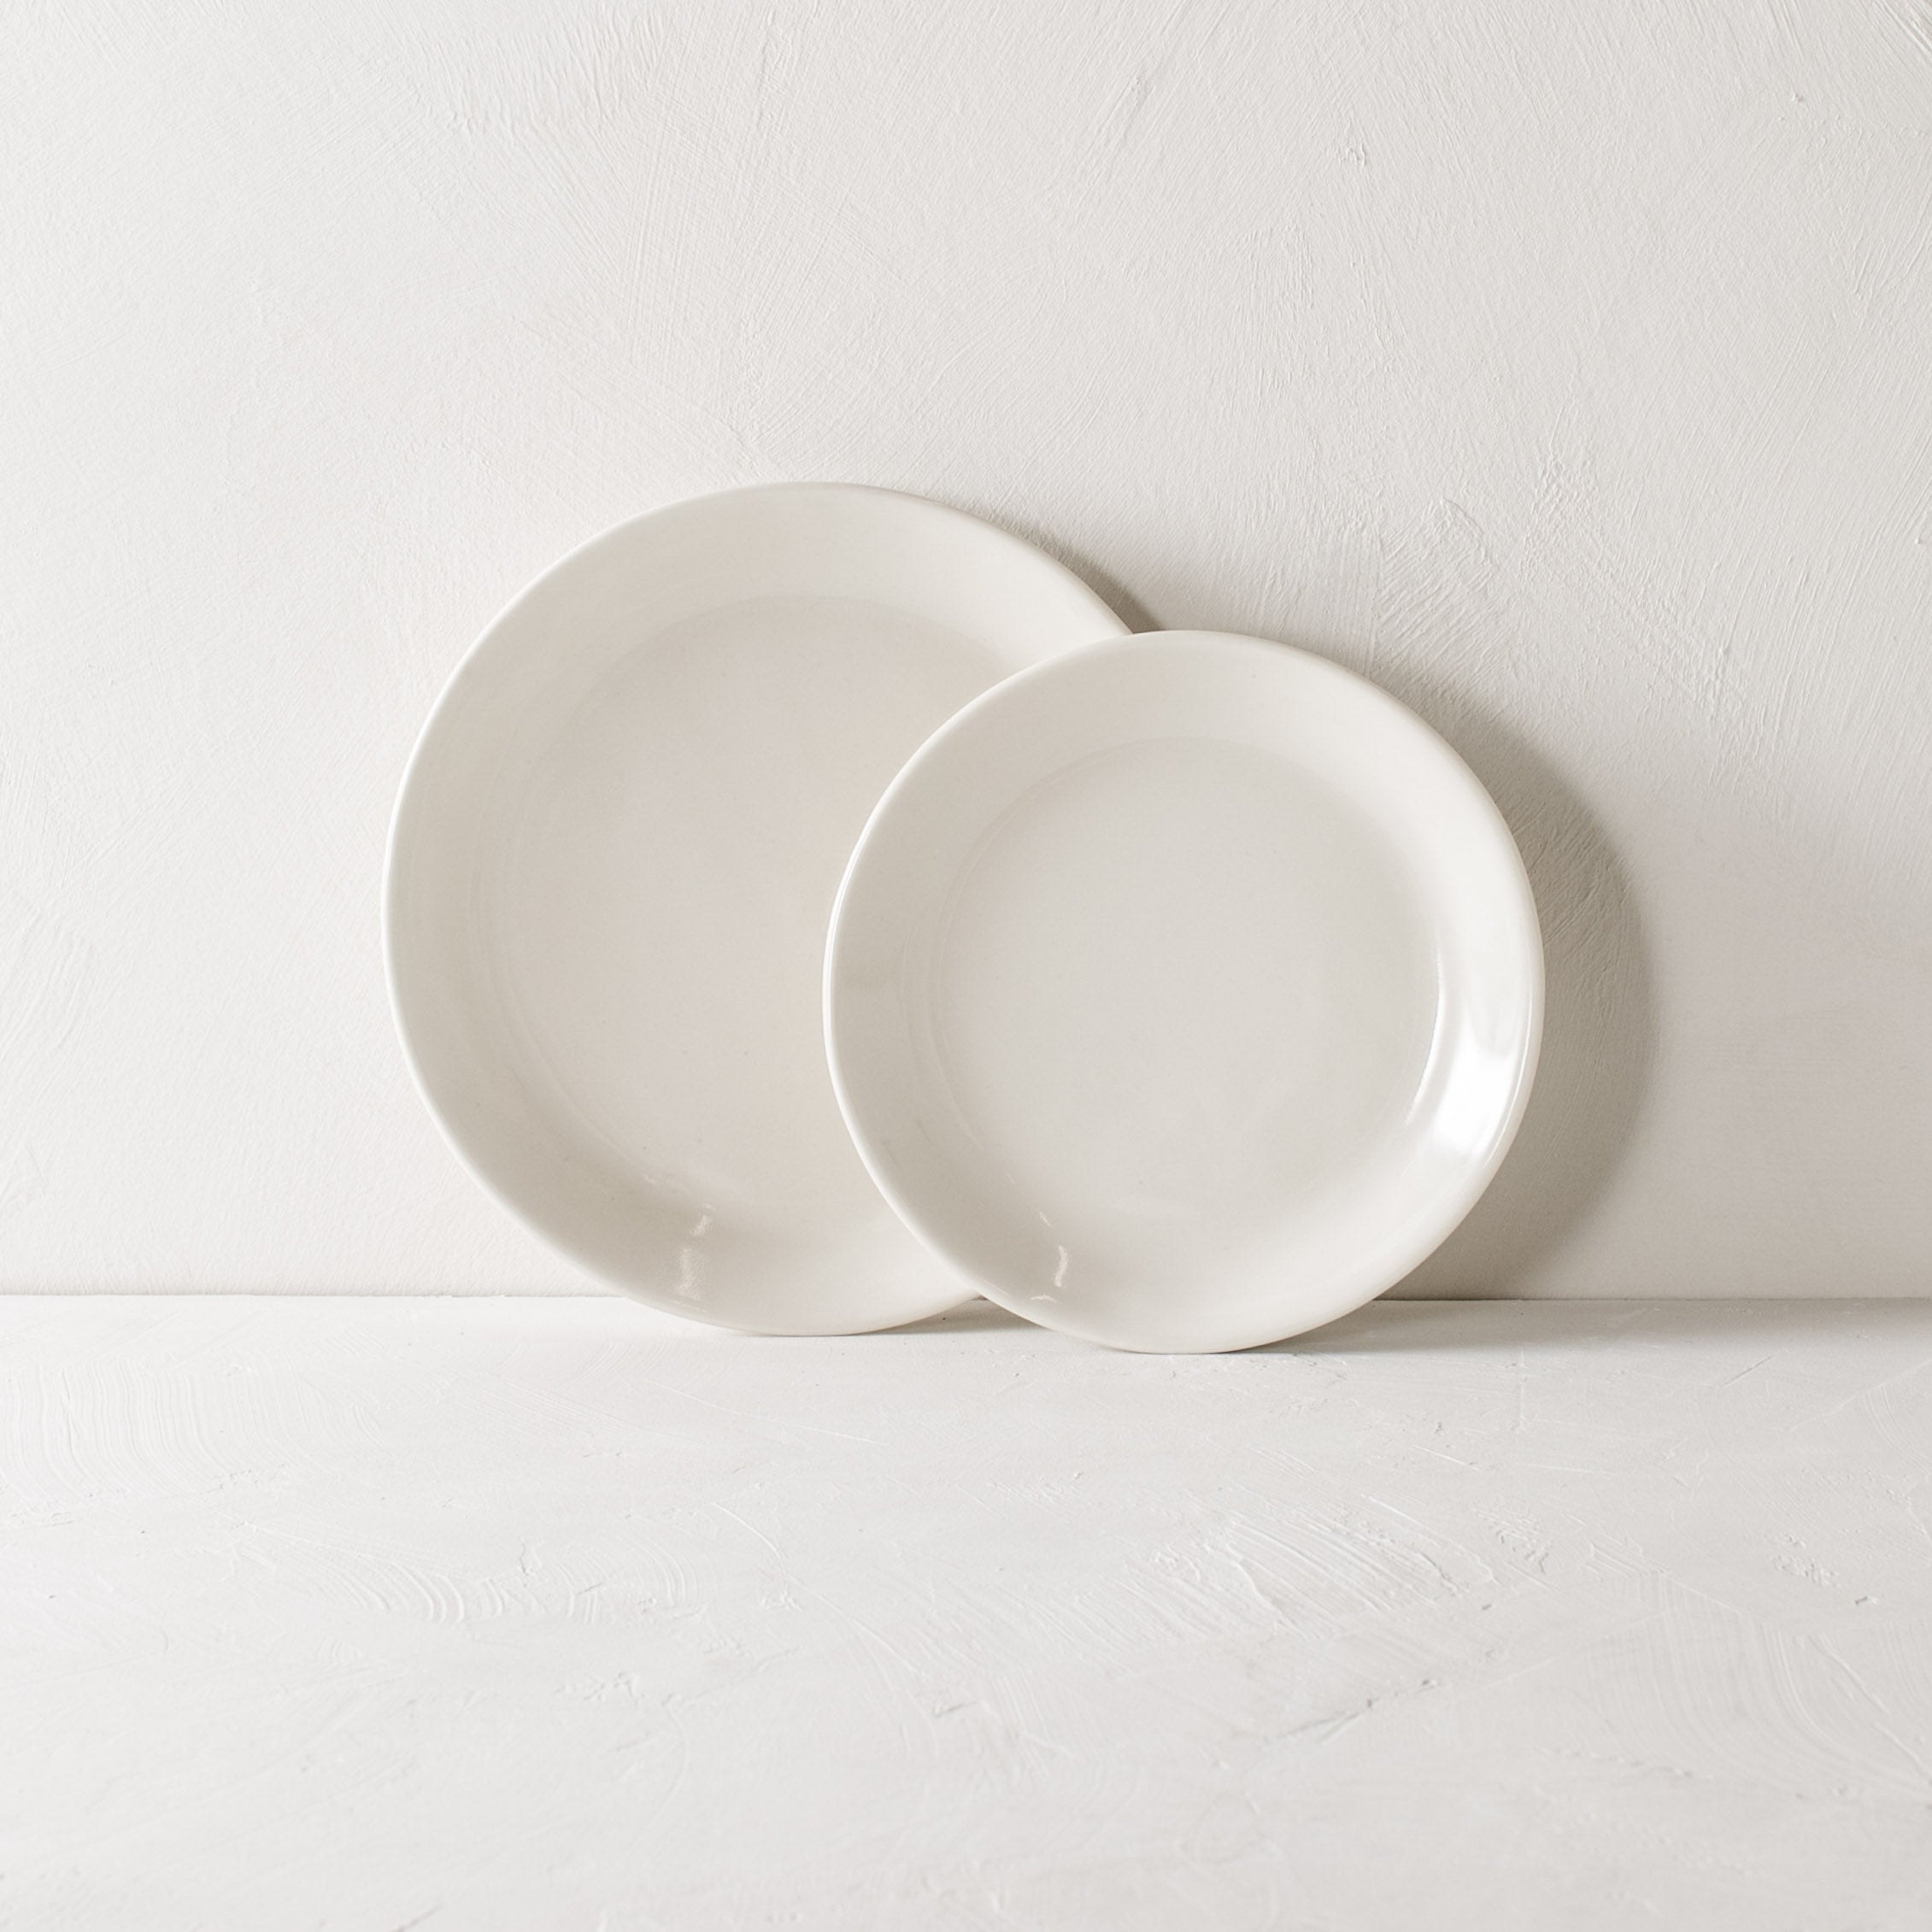 Two minimal white plates, plates are leaning against the textured wall, dinner plate layered under the salad plate. Handmade ceramics plate designed and sold by Convivial Production, Kansas City ceramics.